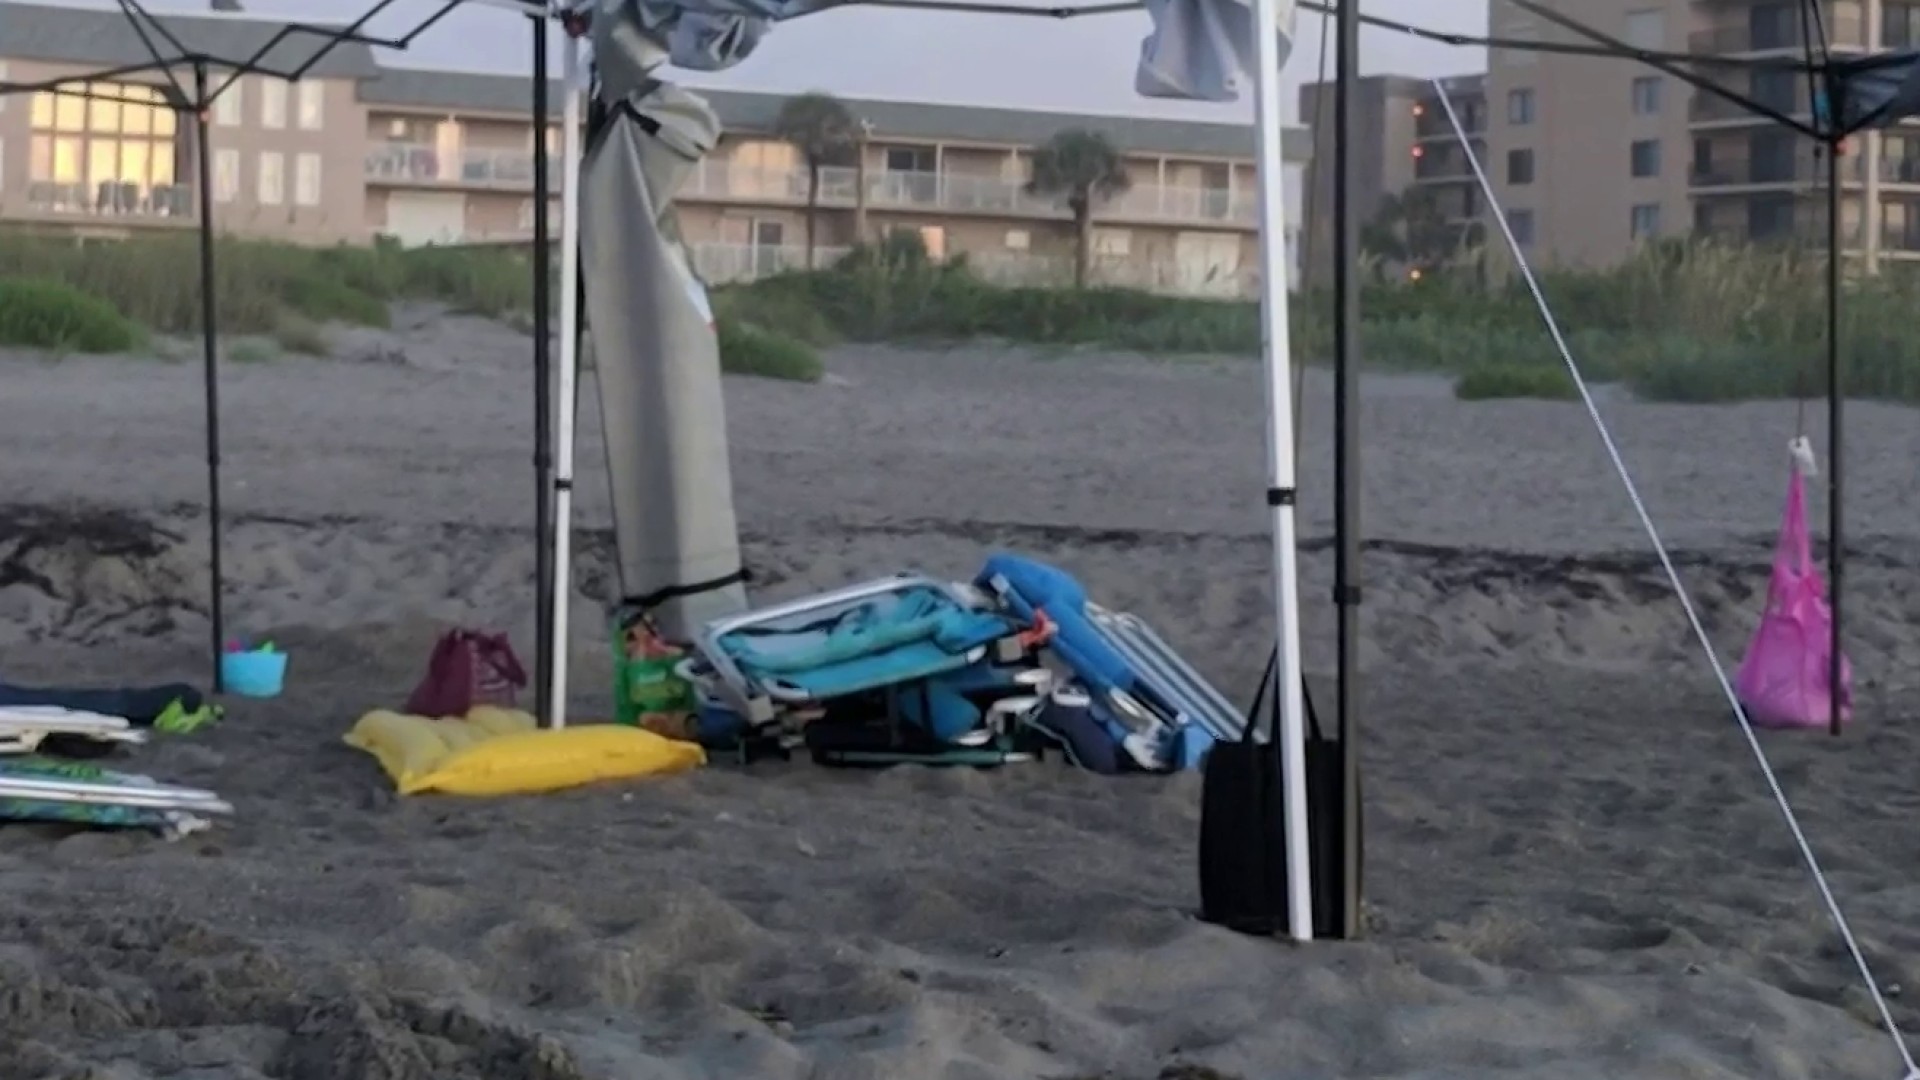 Cocoa Beach ordinance to target discarded items left overnight on beach